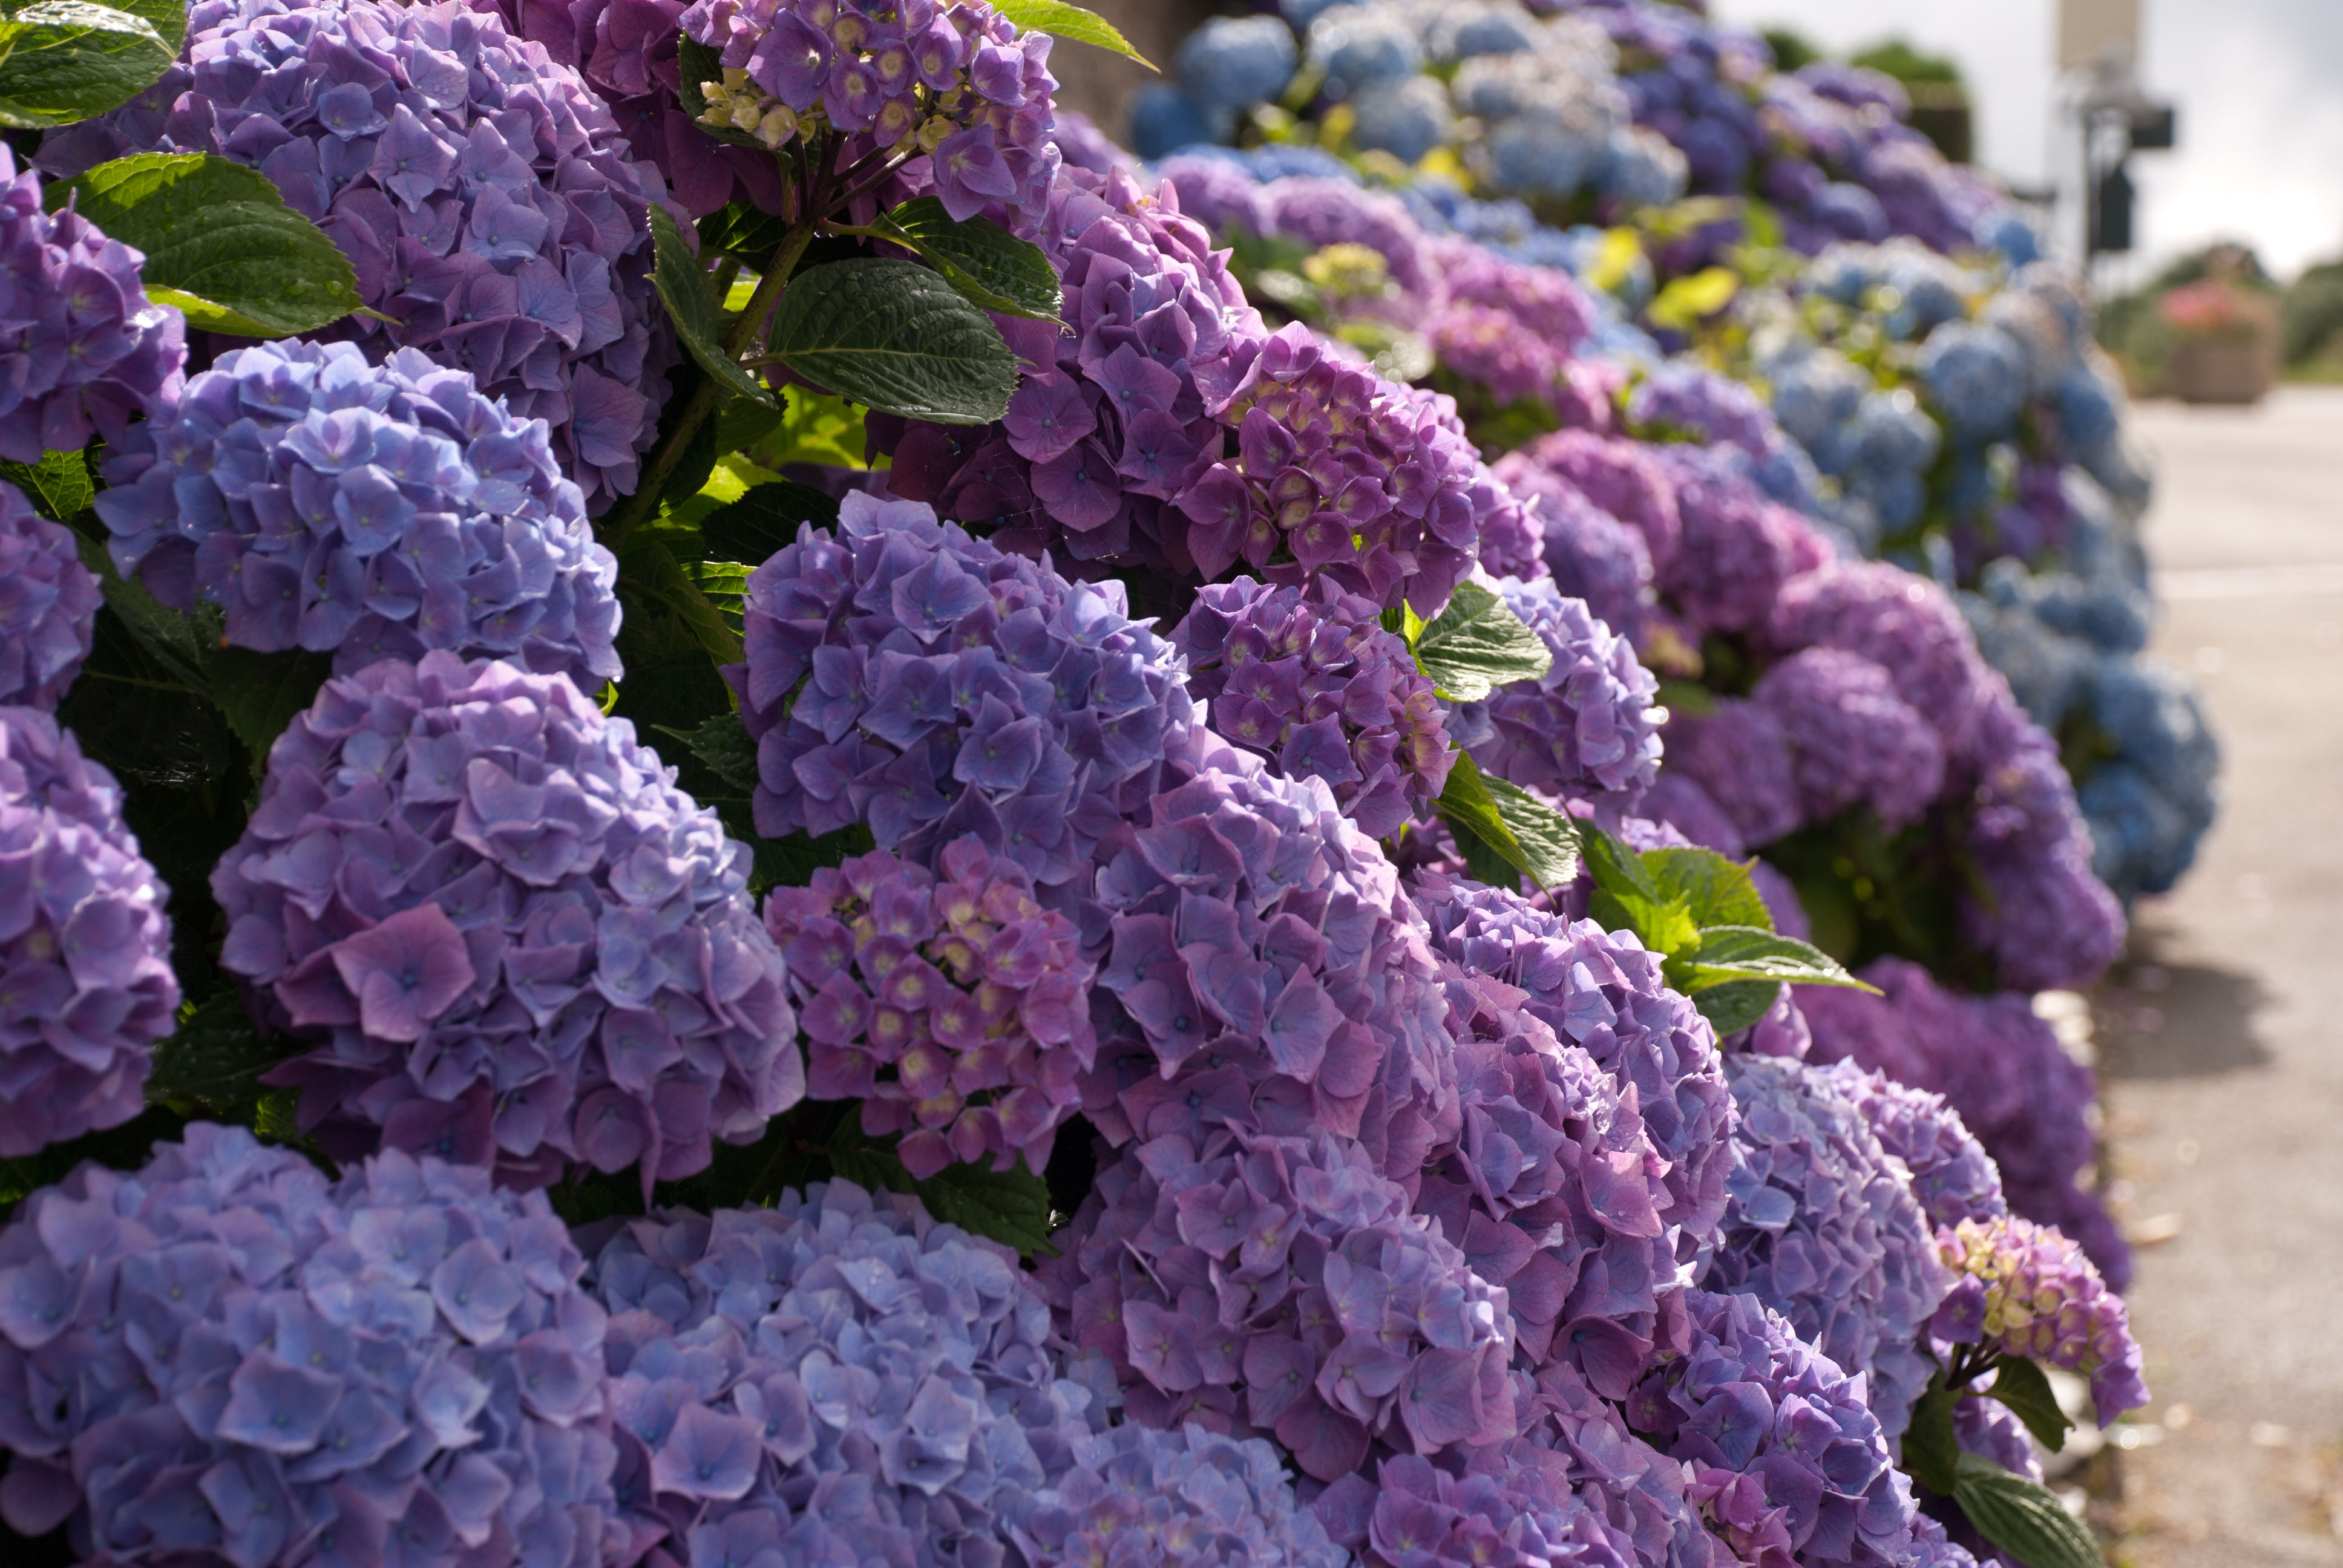 One of the most common types of hydrangea, it has a mophead of 